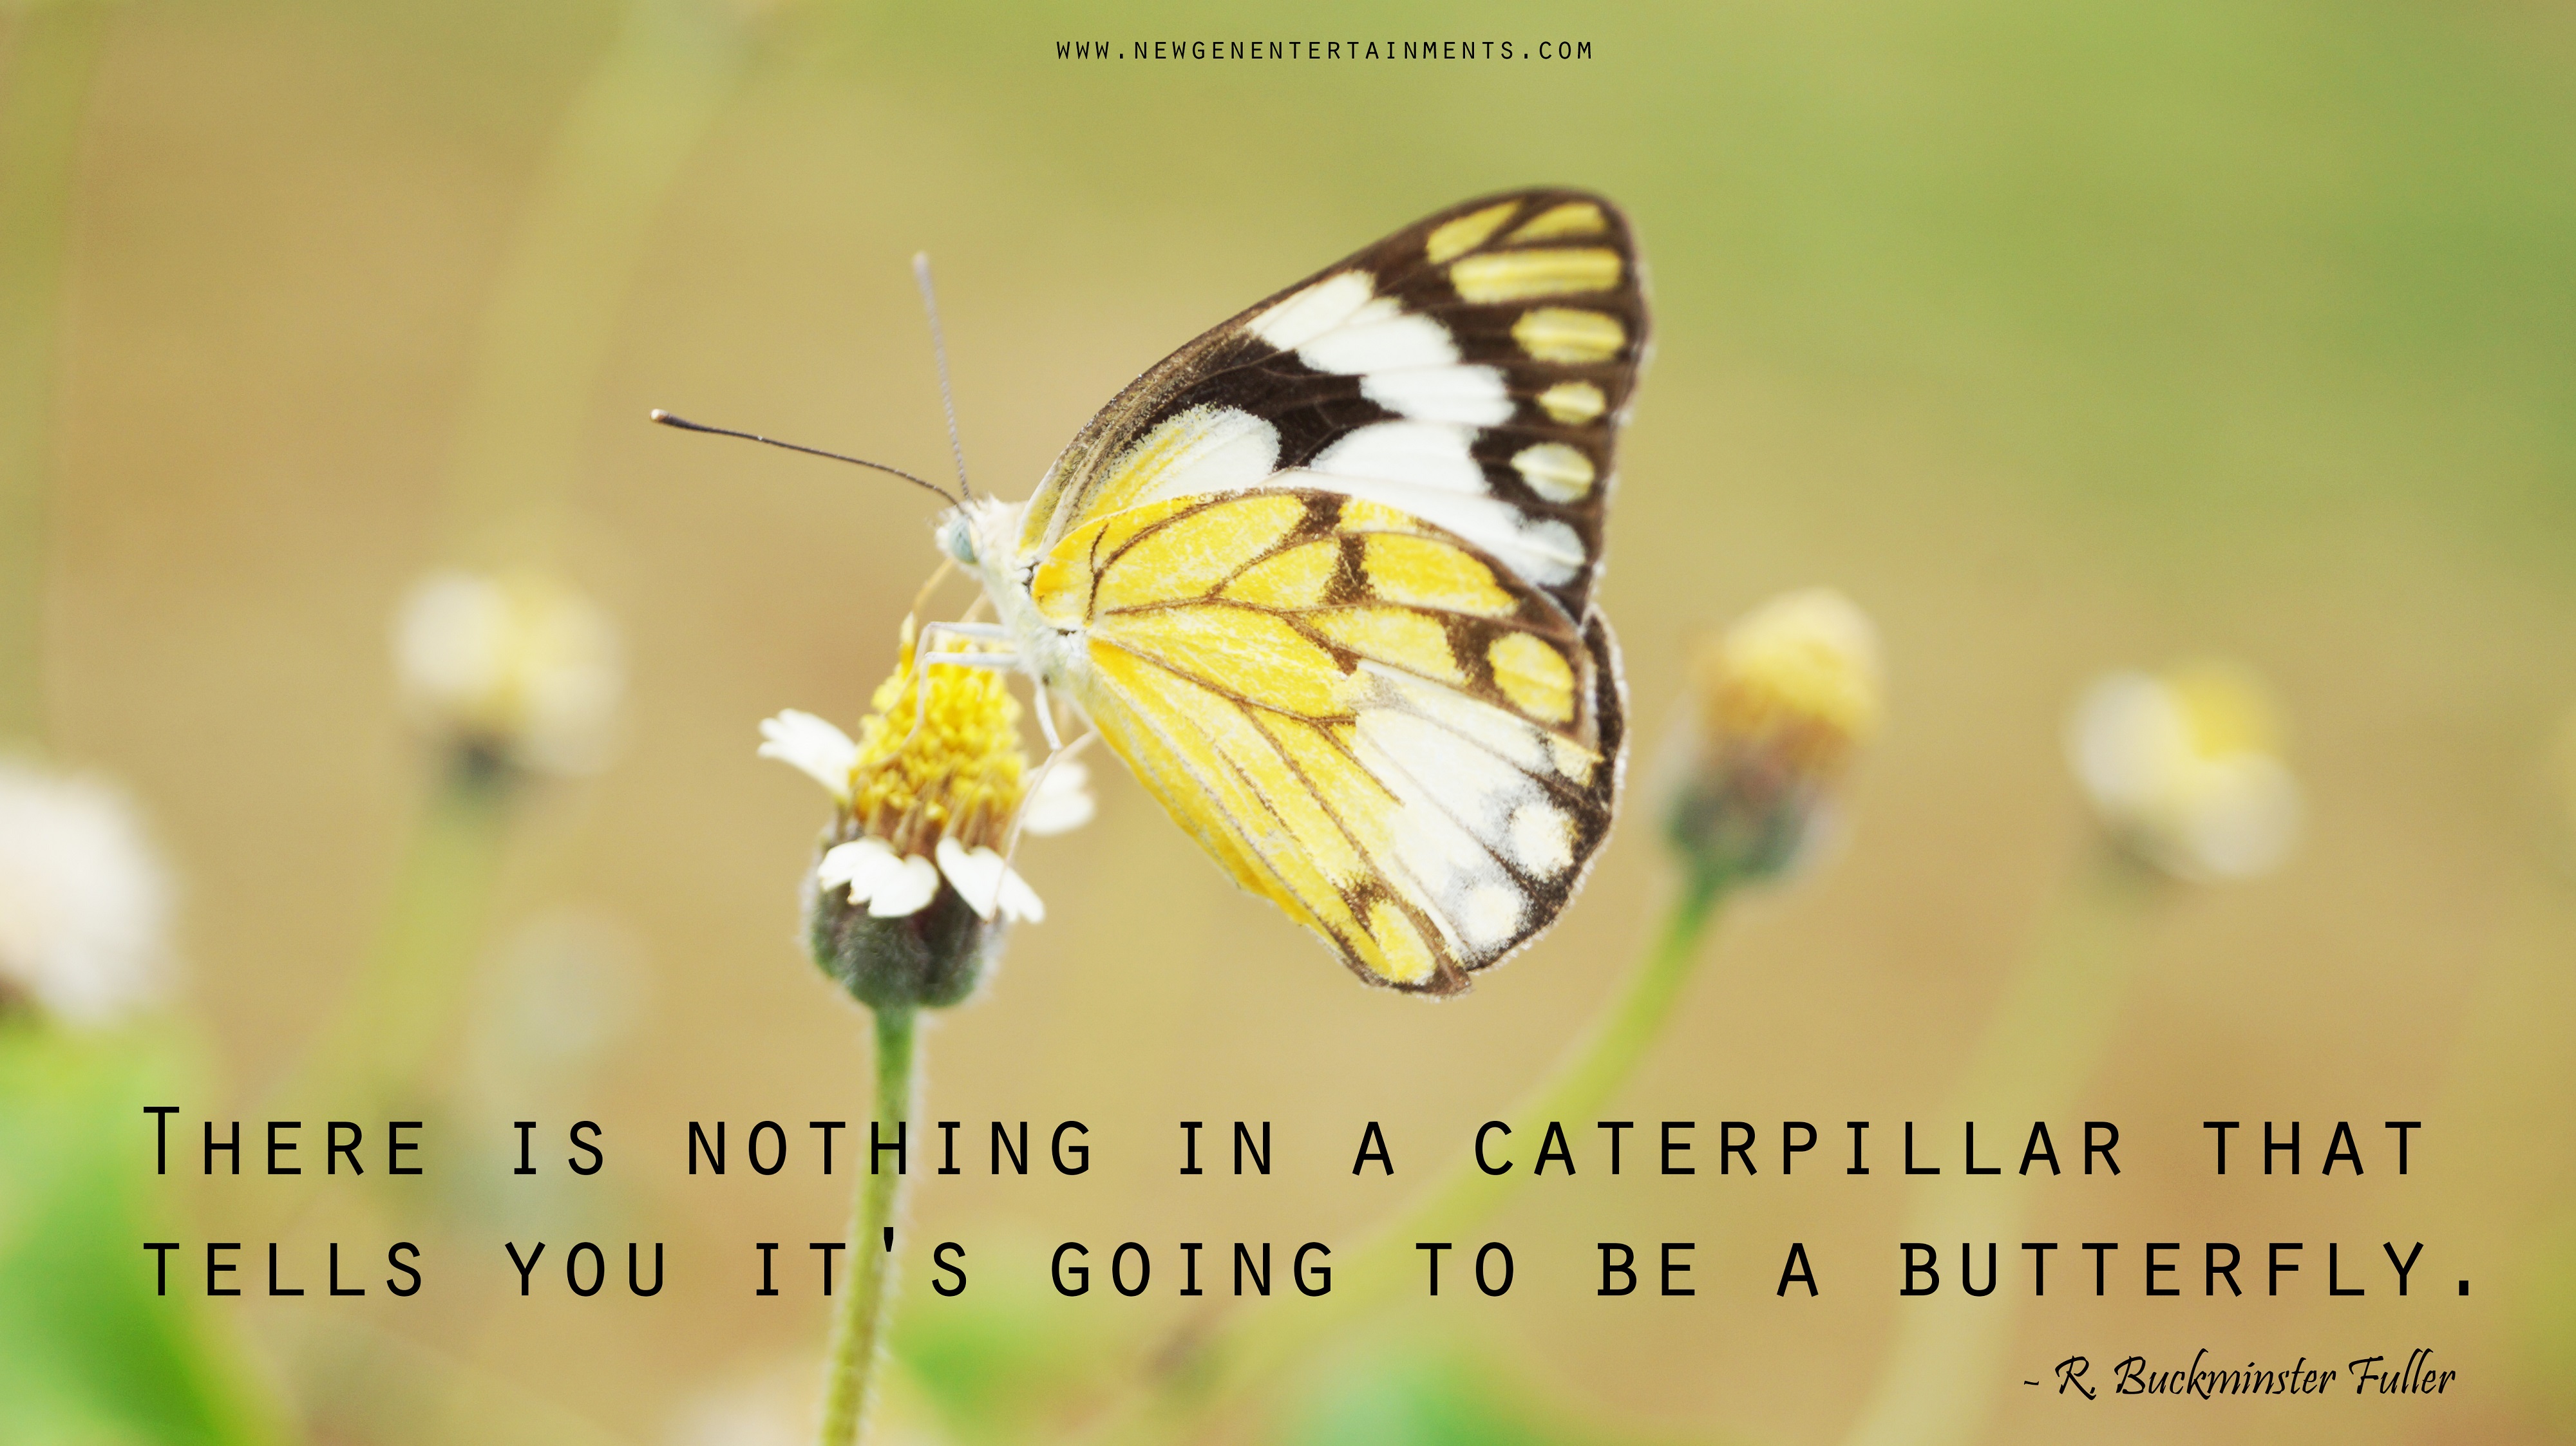 There is nothing in a caterpillar that tells you it's going to be a butterfly